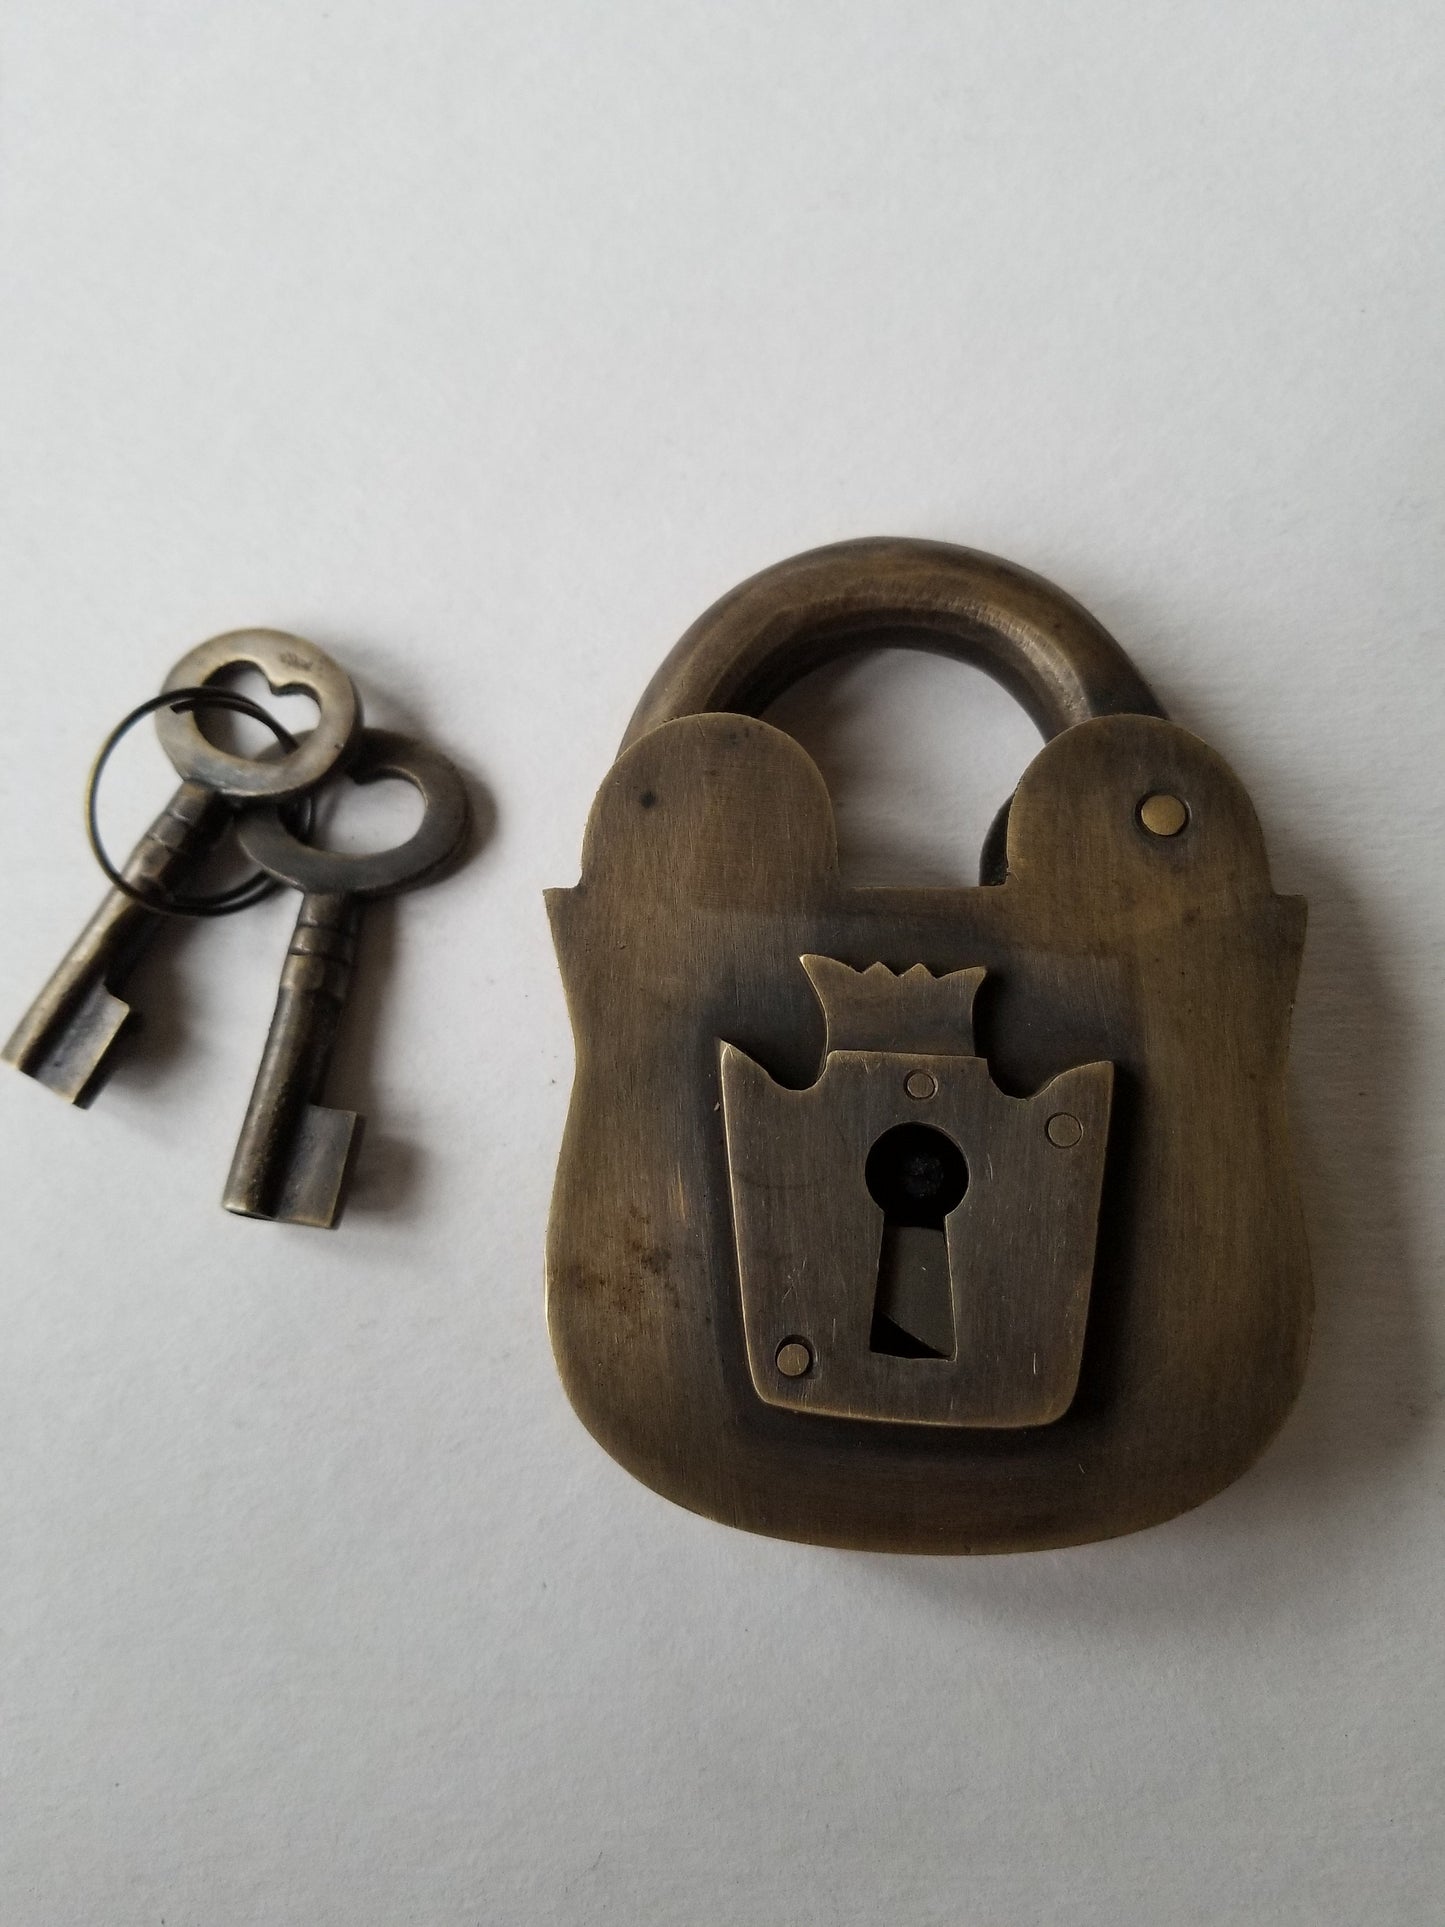 4" PADLOCK Vintage style old antique solid brass 2 key heavy age lock #L5